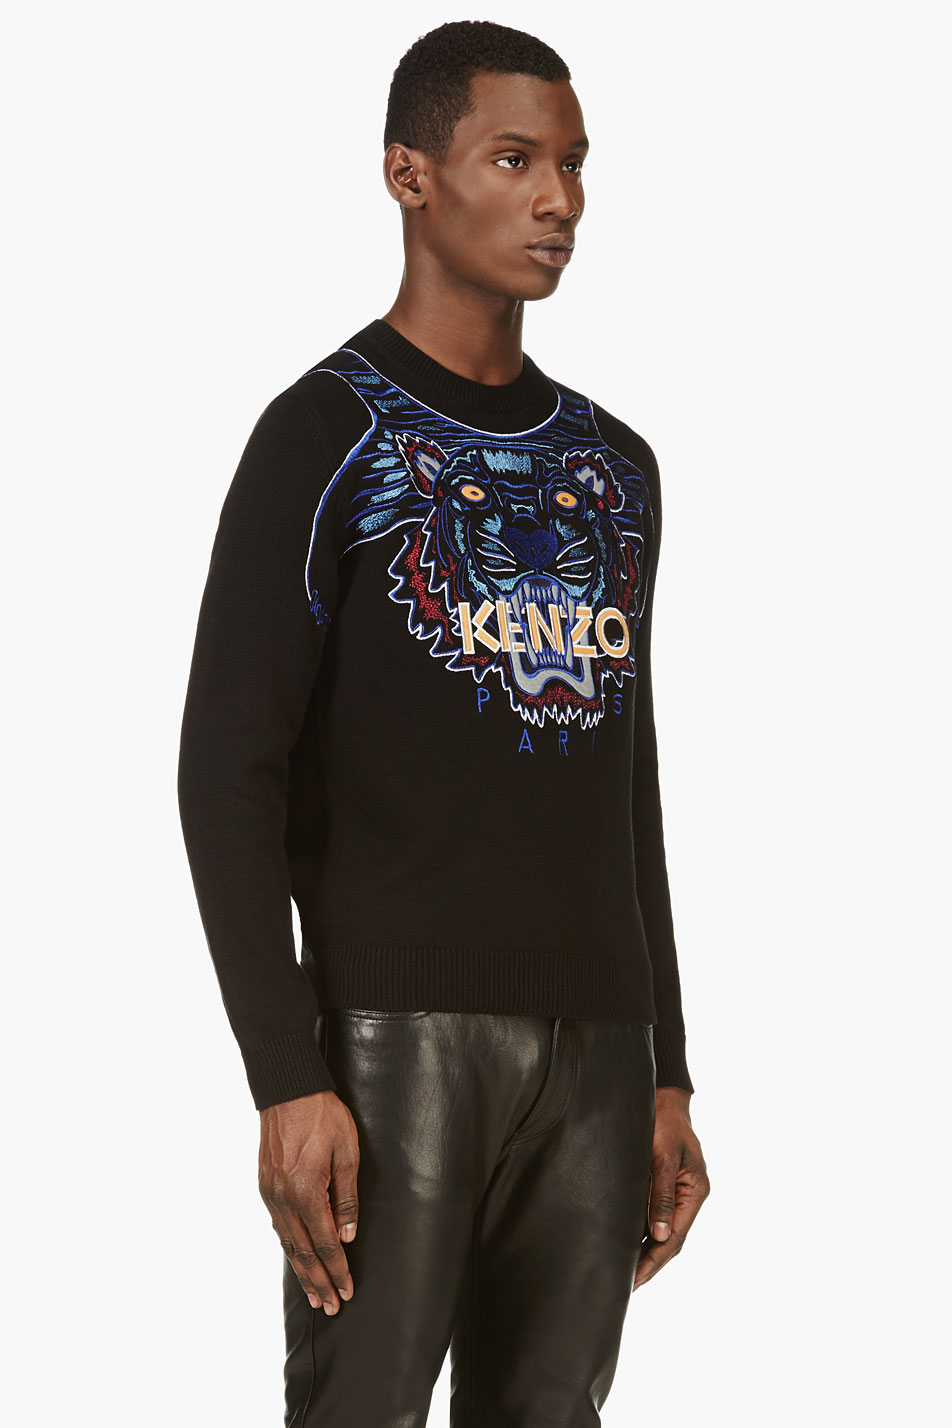 Lyst - Kenzo Black Tiger Skin Embroidered Sweater in Black for Men